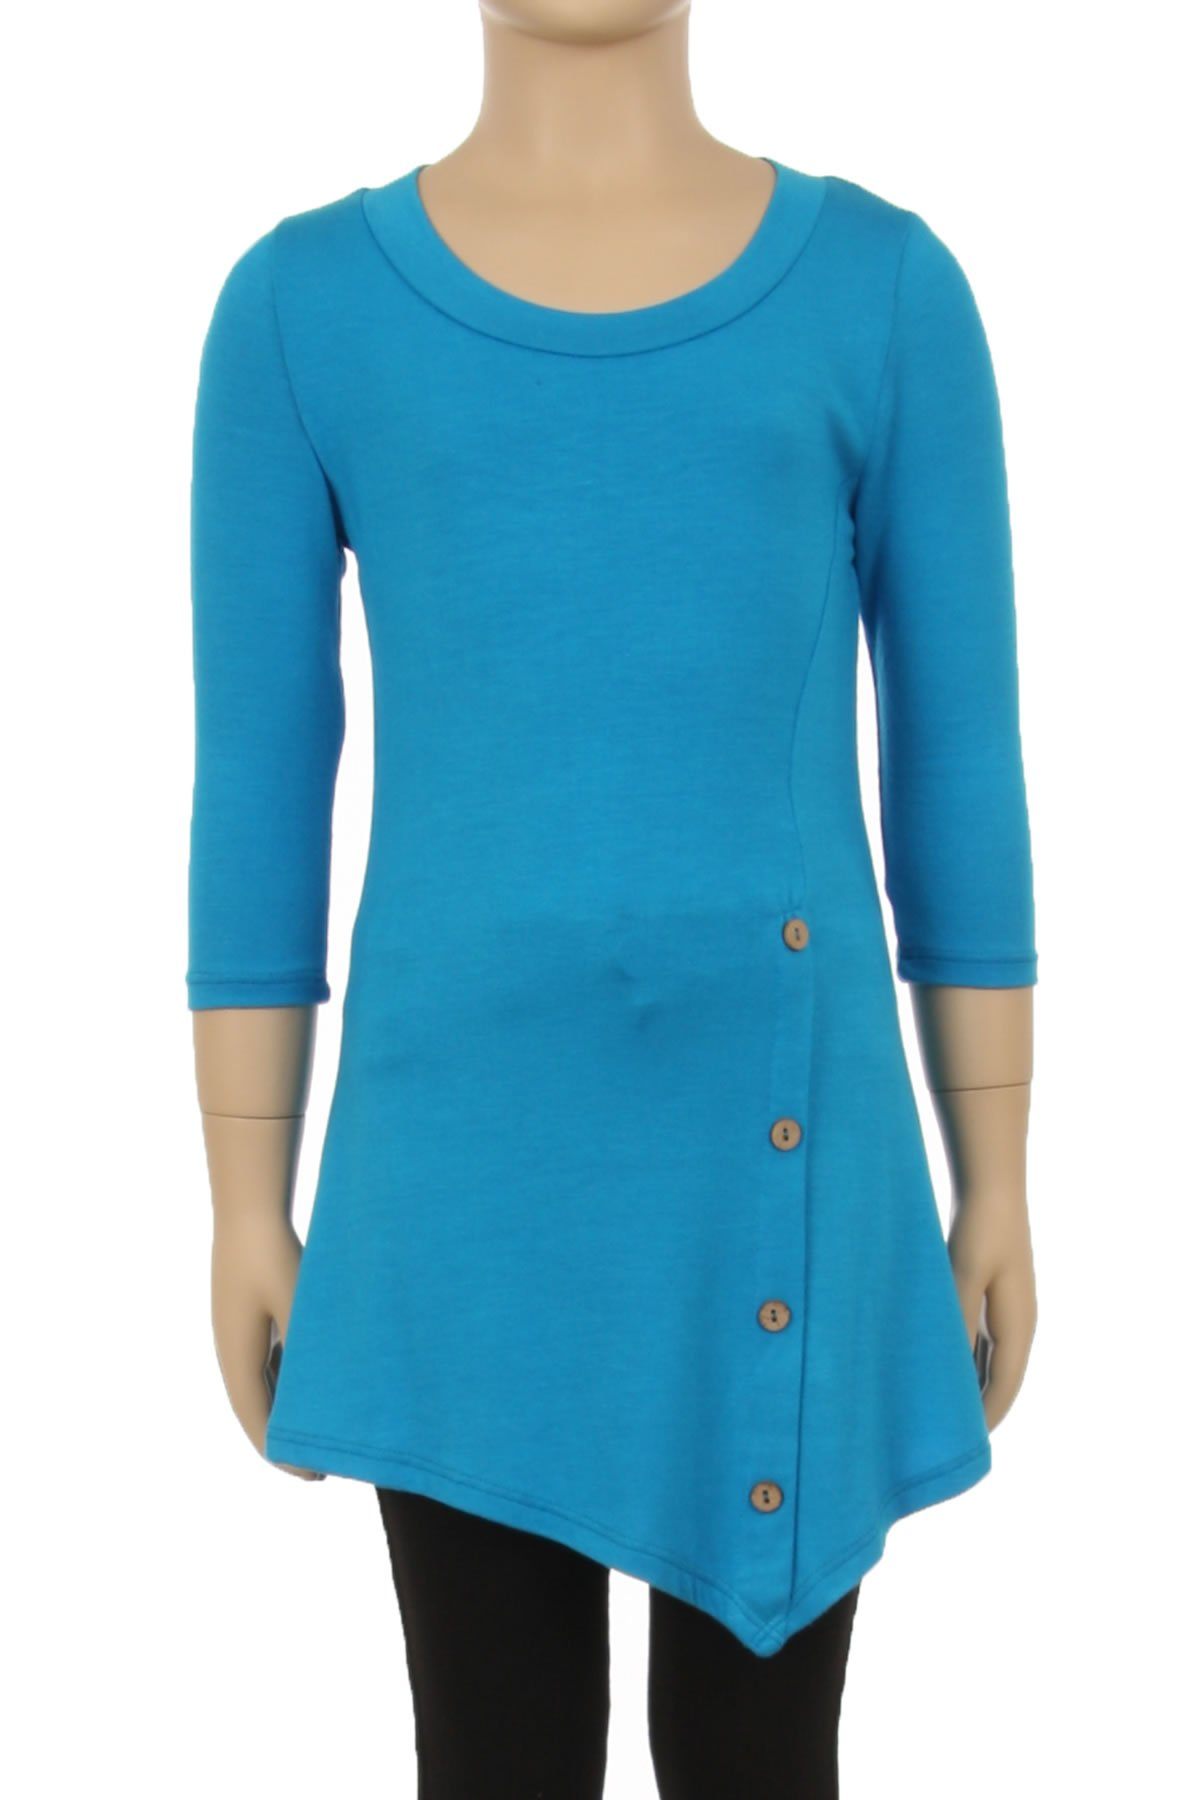 Girls Teal Blue Dress Long Tunic Top For Kids – MomMe and More